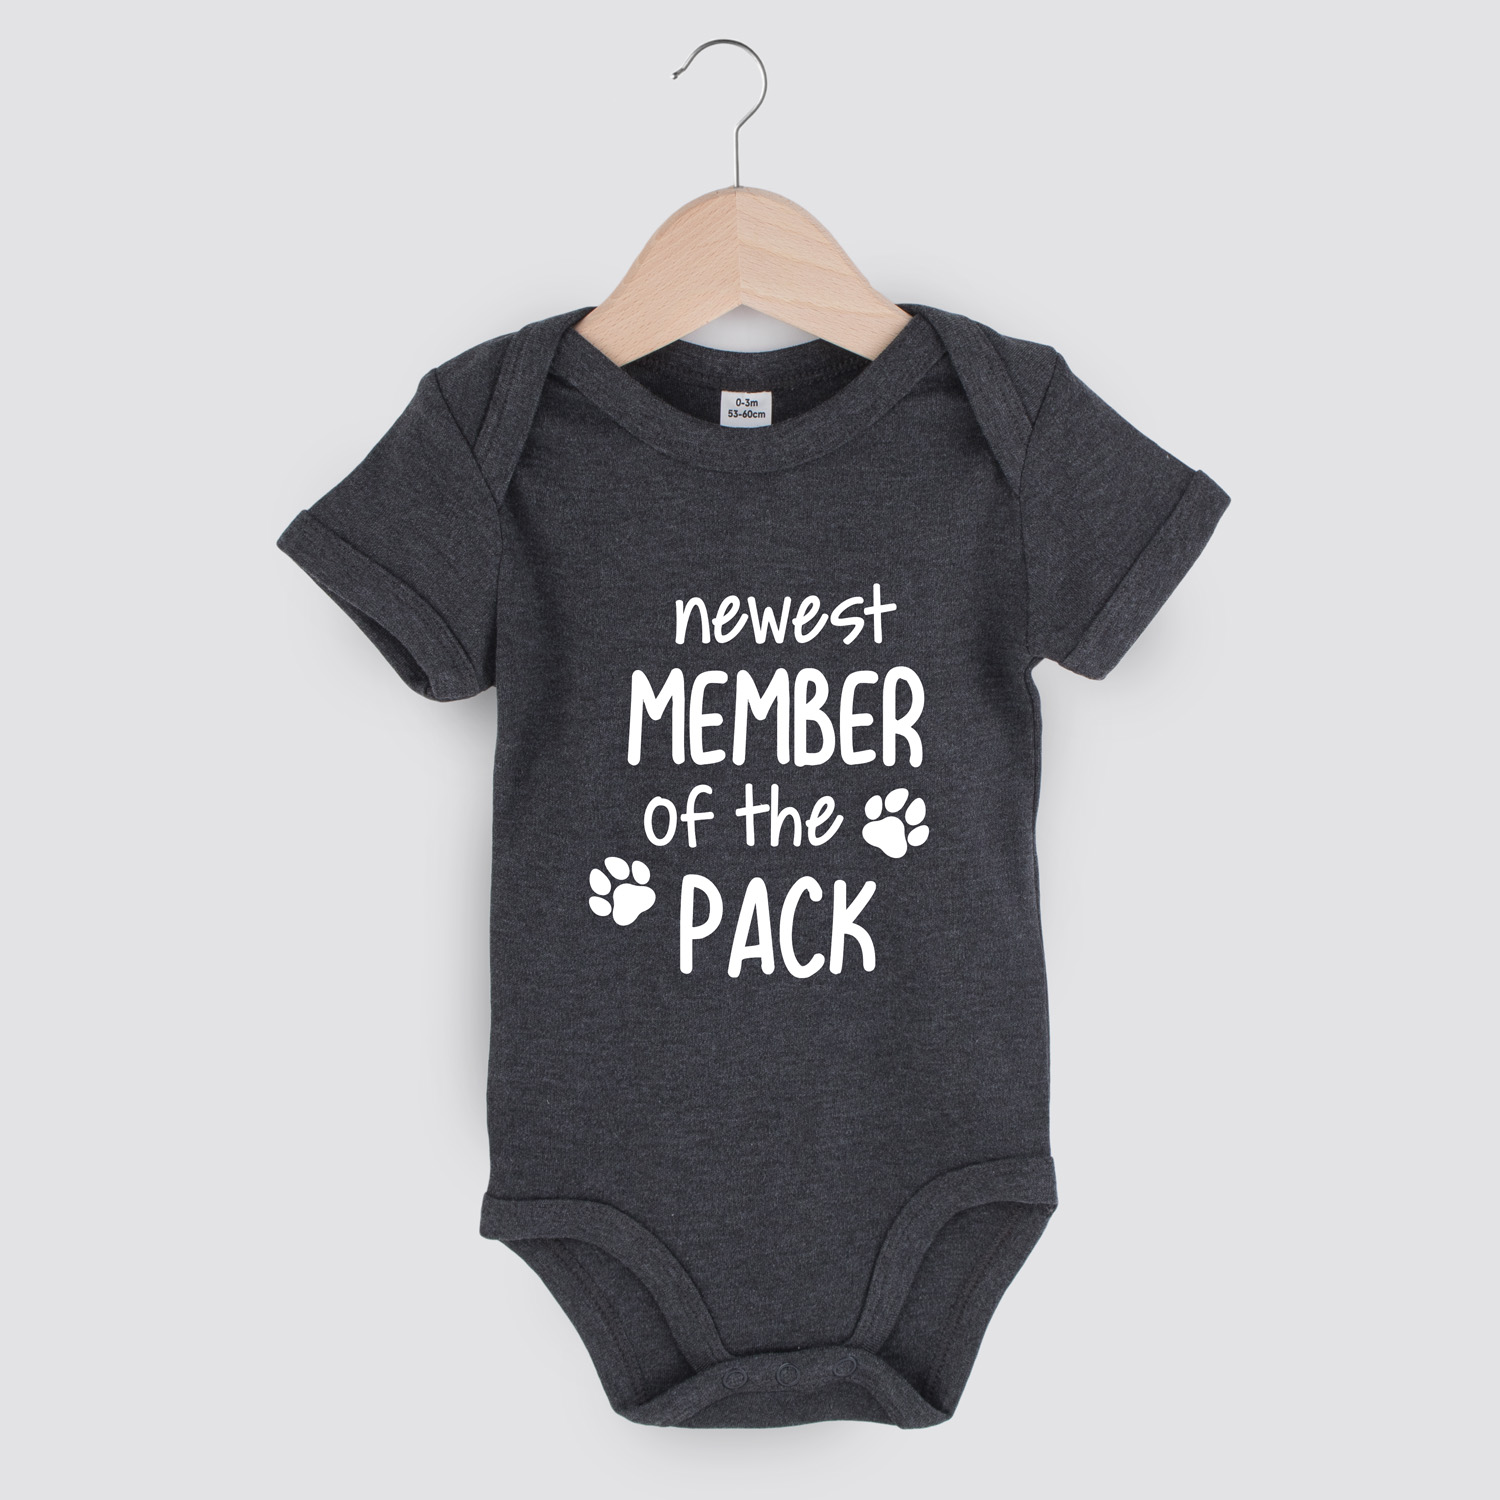 Newest member of the pack | Baby romper | my fabulous life.